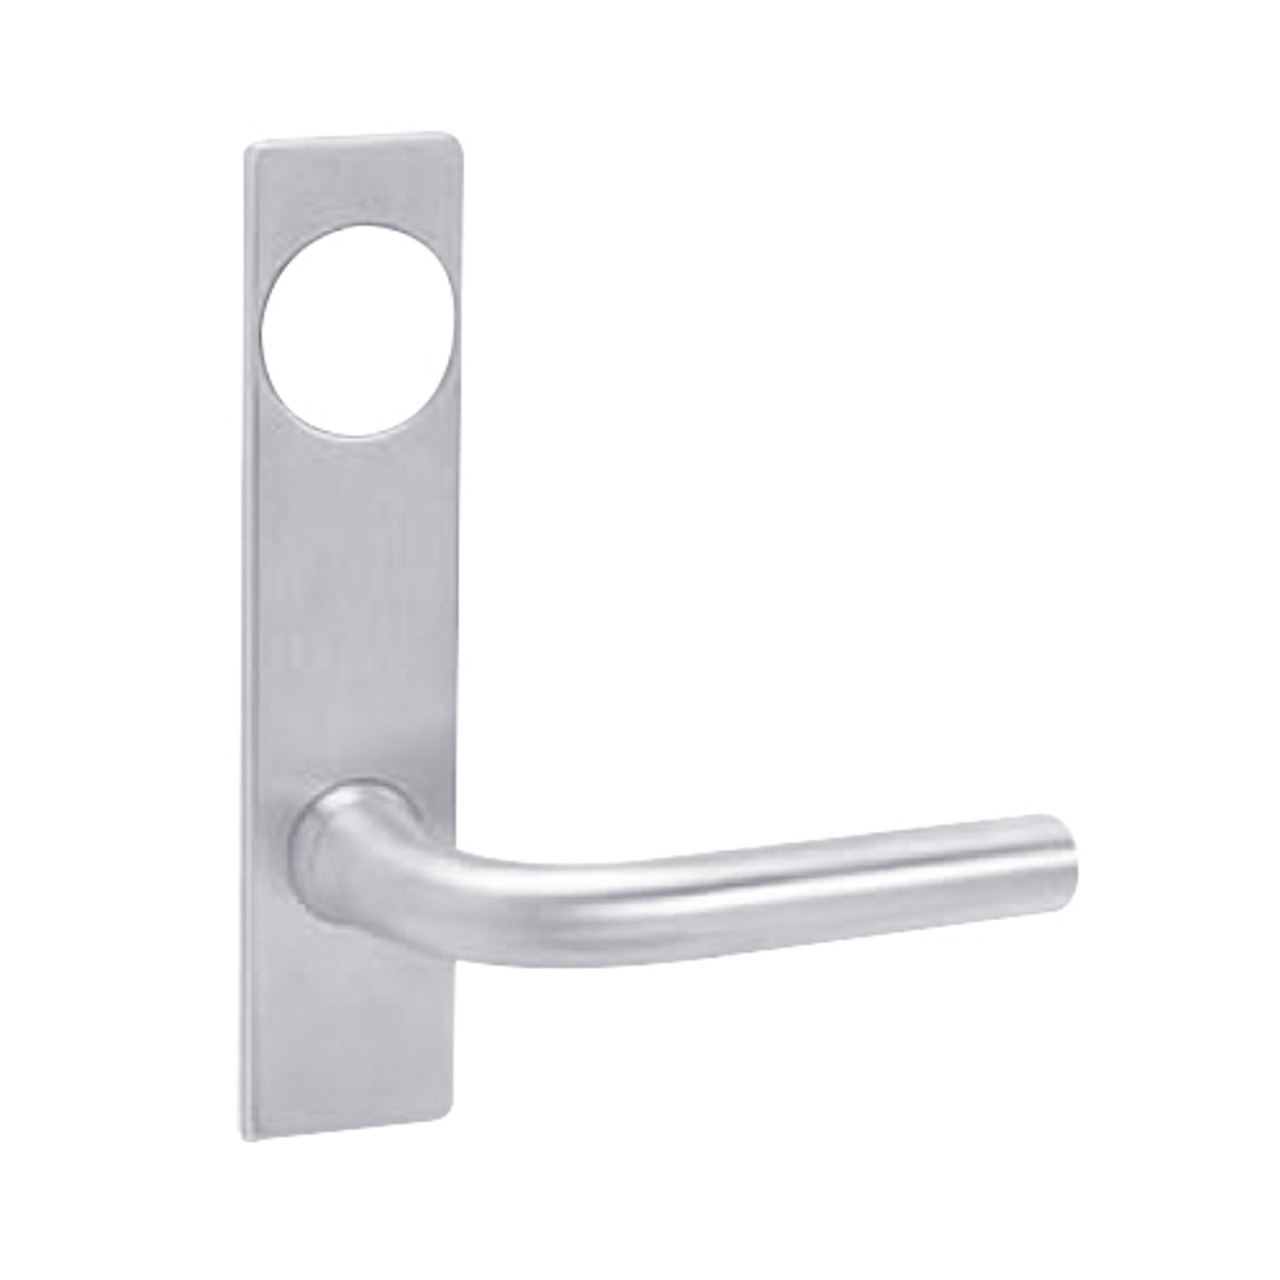 ML2065-RWP-625-CL6 Corbin Russwin ML2000 Series IC 6-Pin Less Core Mortise Dormitory Locksets with Regis Lever in Bright Chrome